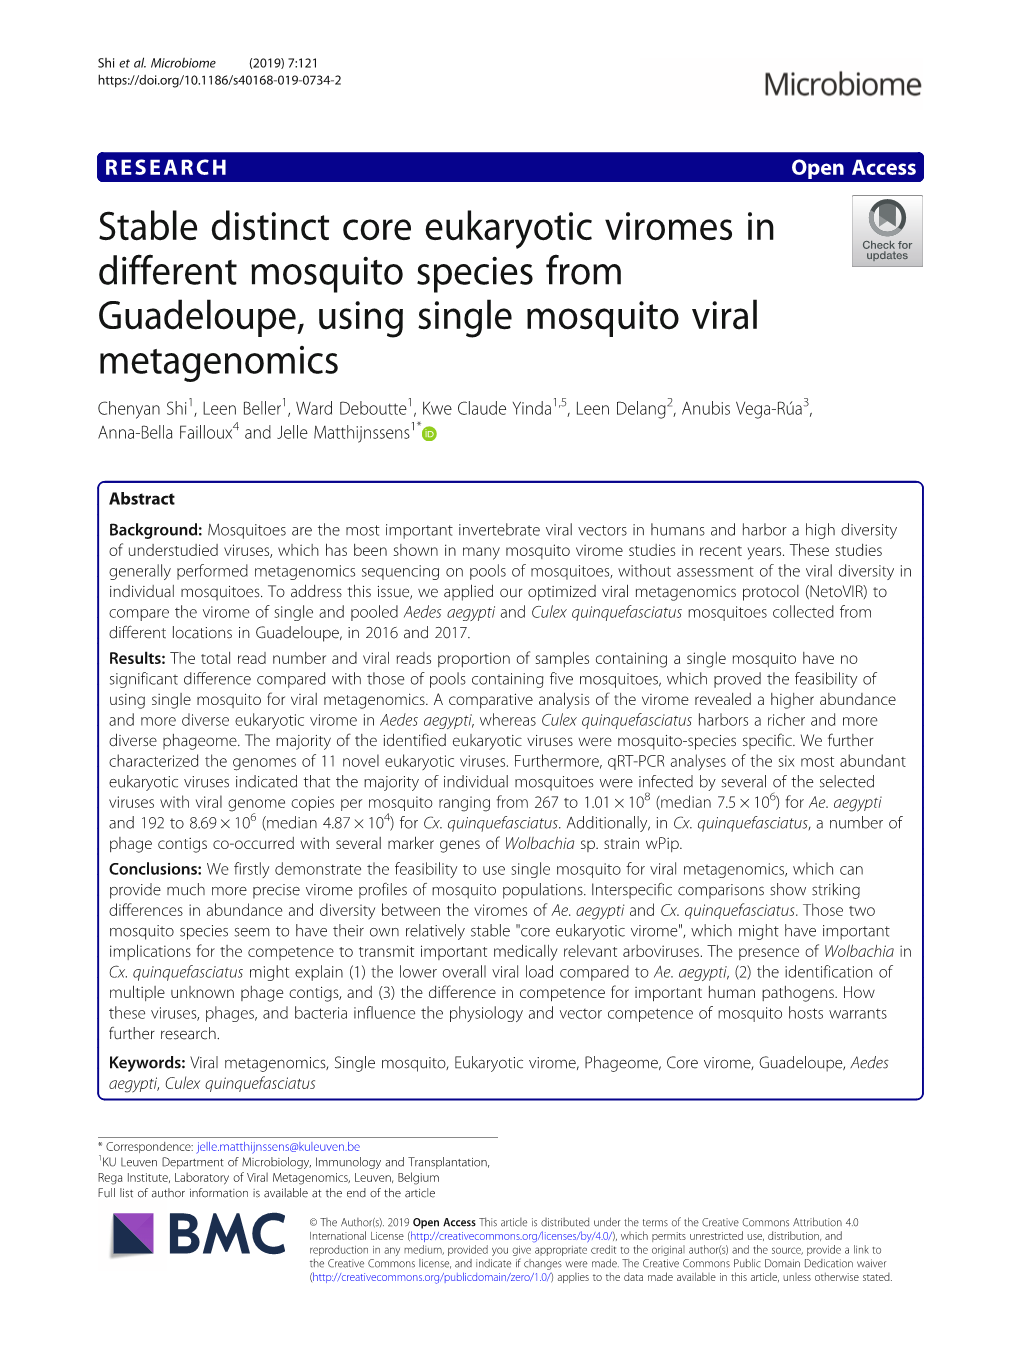 Stable Distinct Core Eukaryotic Viromes in Different Mosquito Species From